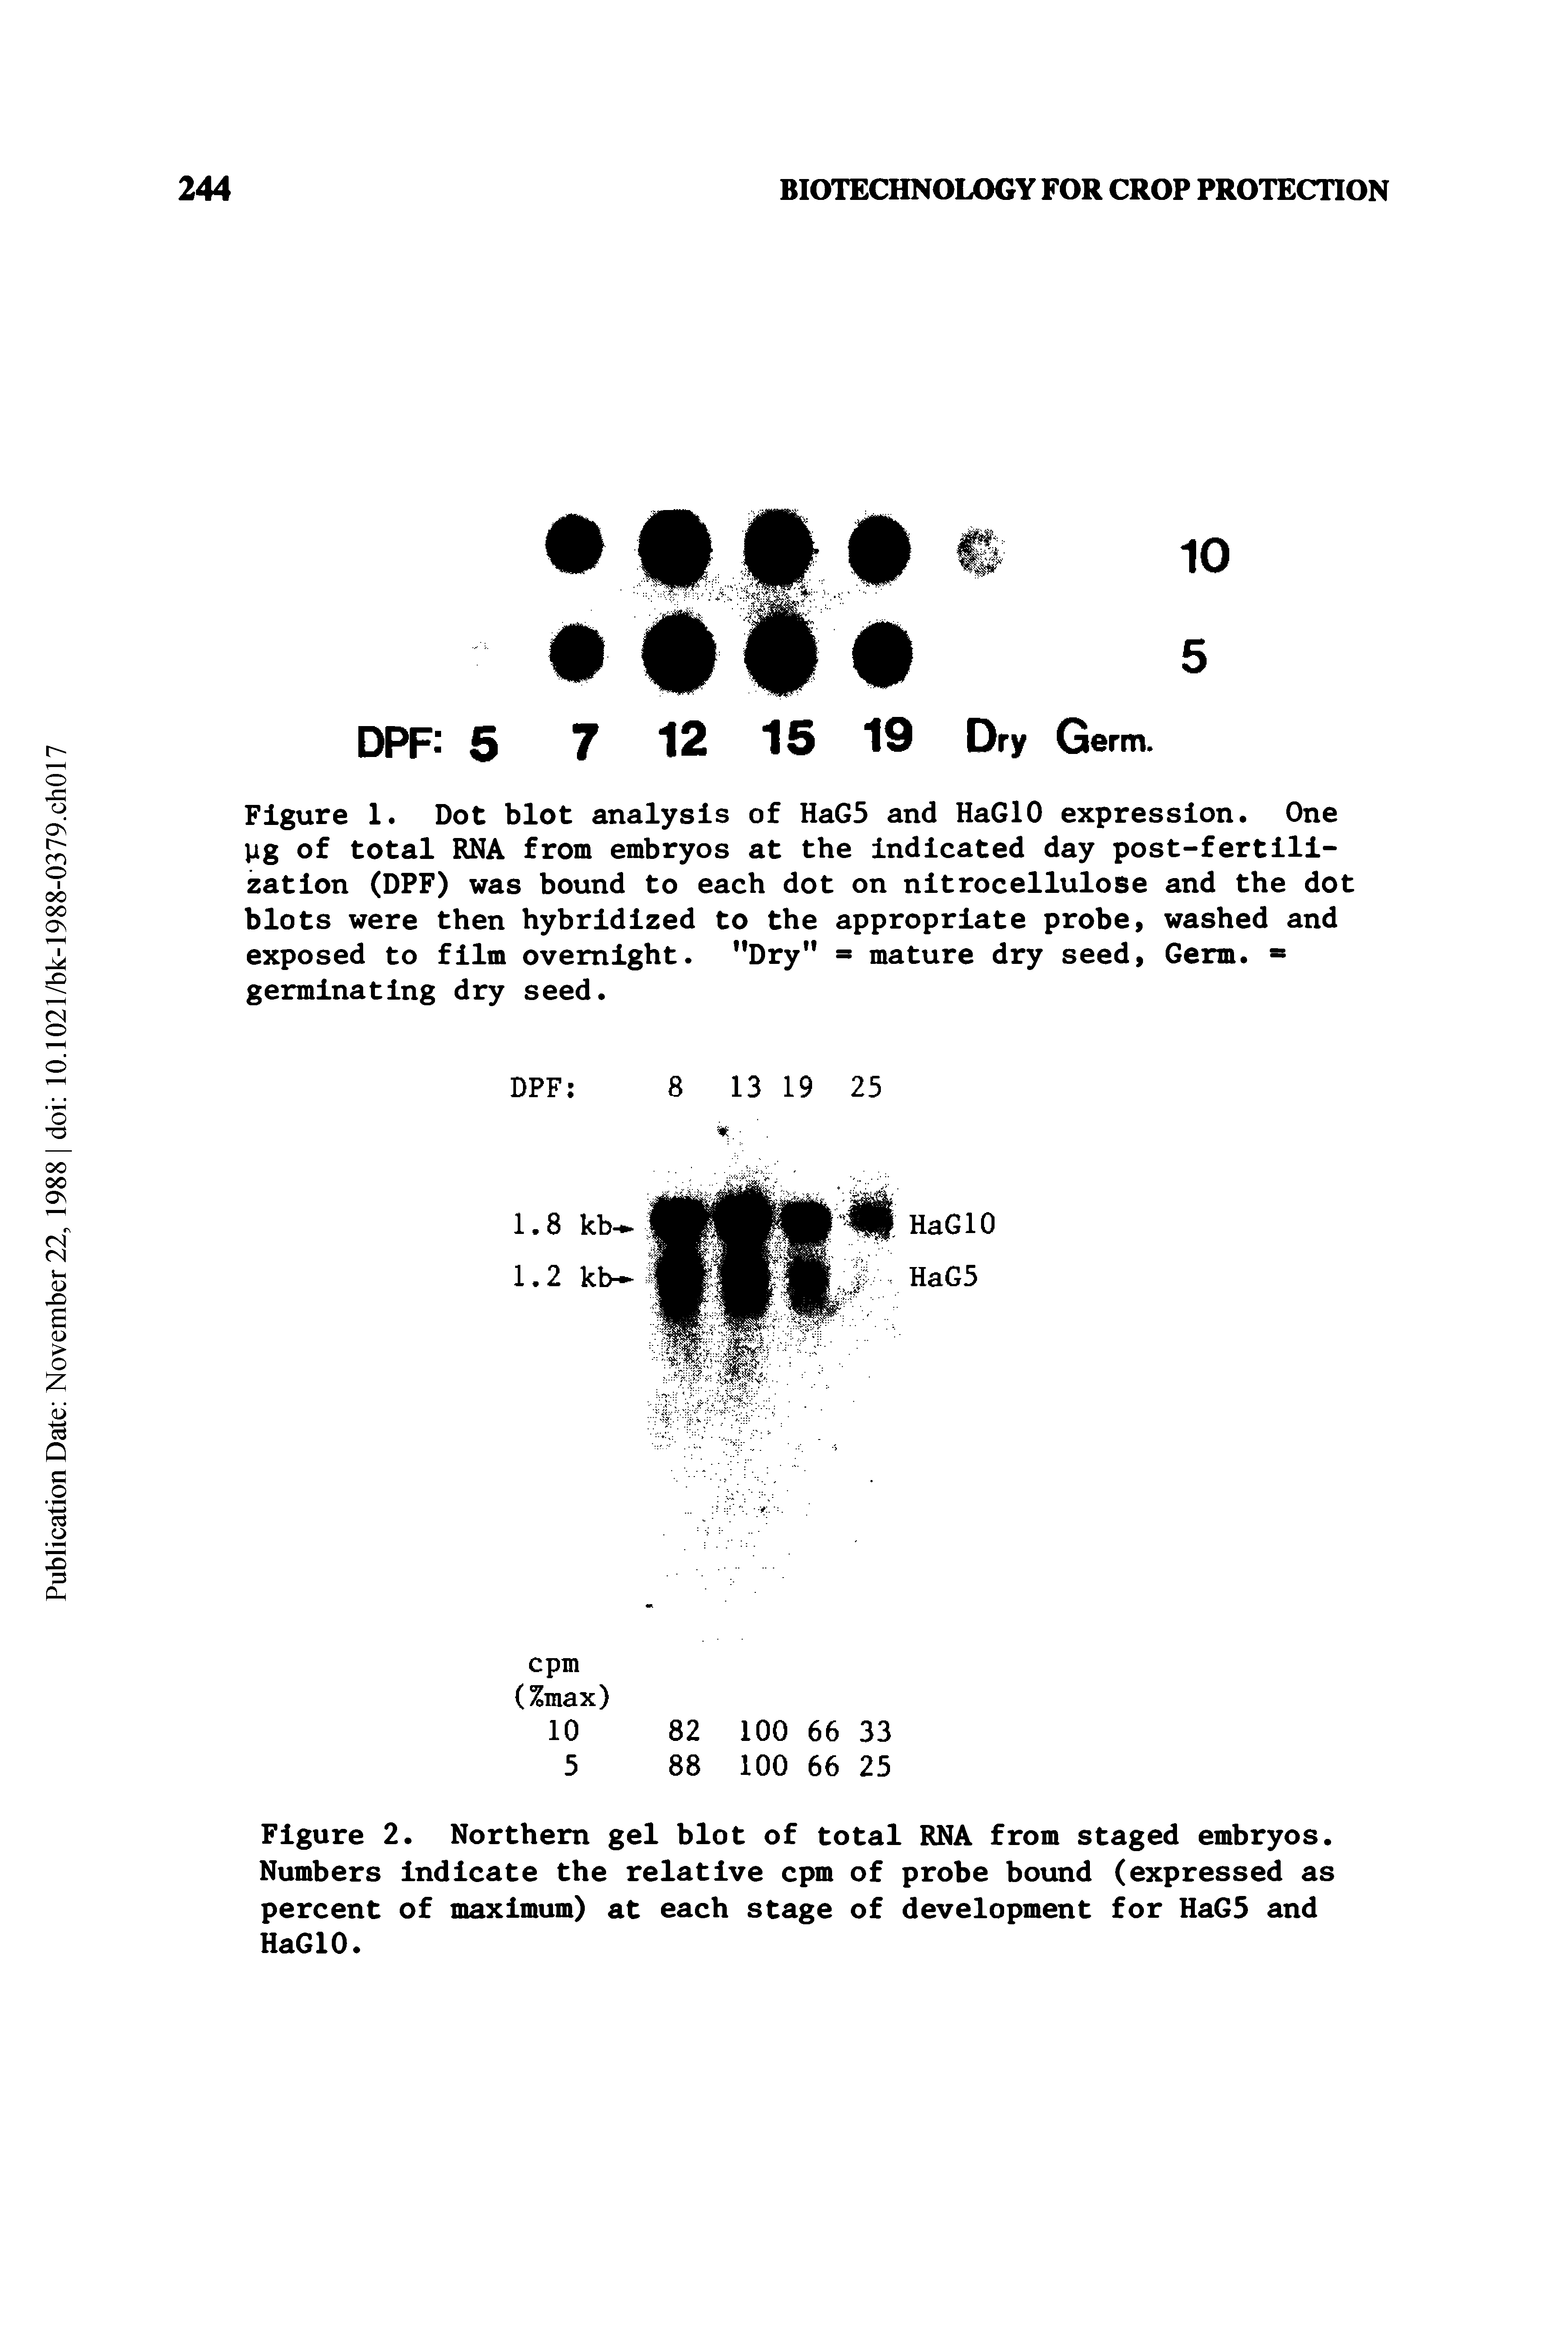 Figure 1. Dot blot analysis of HaG5 and HaGlO expression. One pg of total RNA from embryos at the indicated day post-fertilization (DPF) was bound to each dot on nitrocellulose and the dot blots were then hybridized to the appropriate probe, washed and exposed to film overnight. "Dry" - mature dry seed, Germ. germinating dry seed.